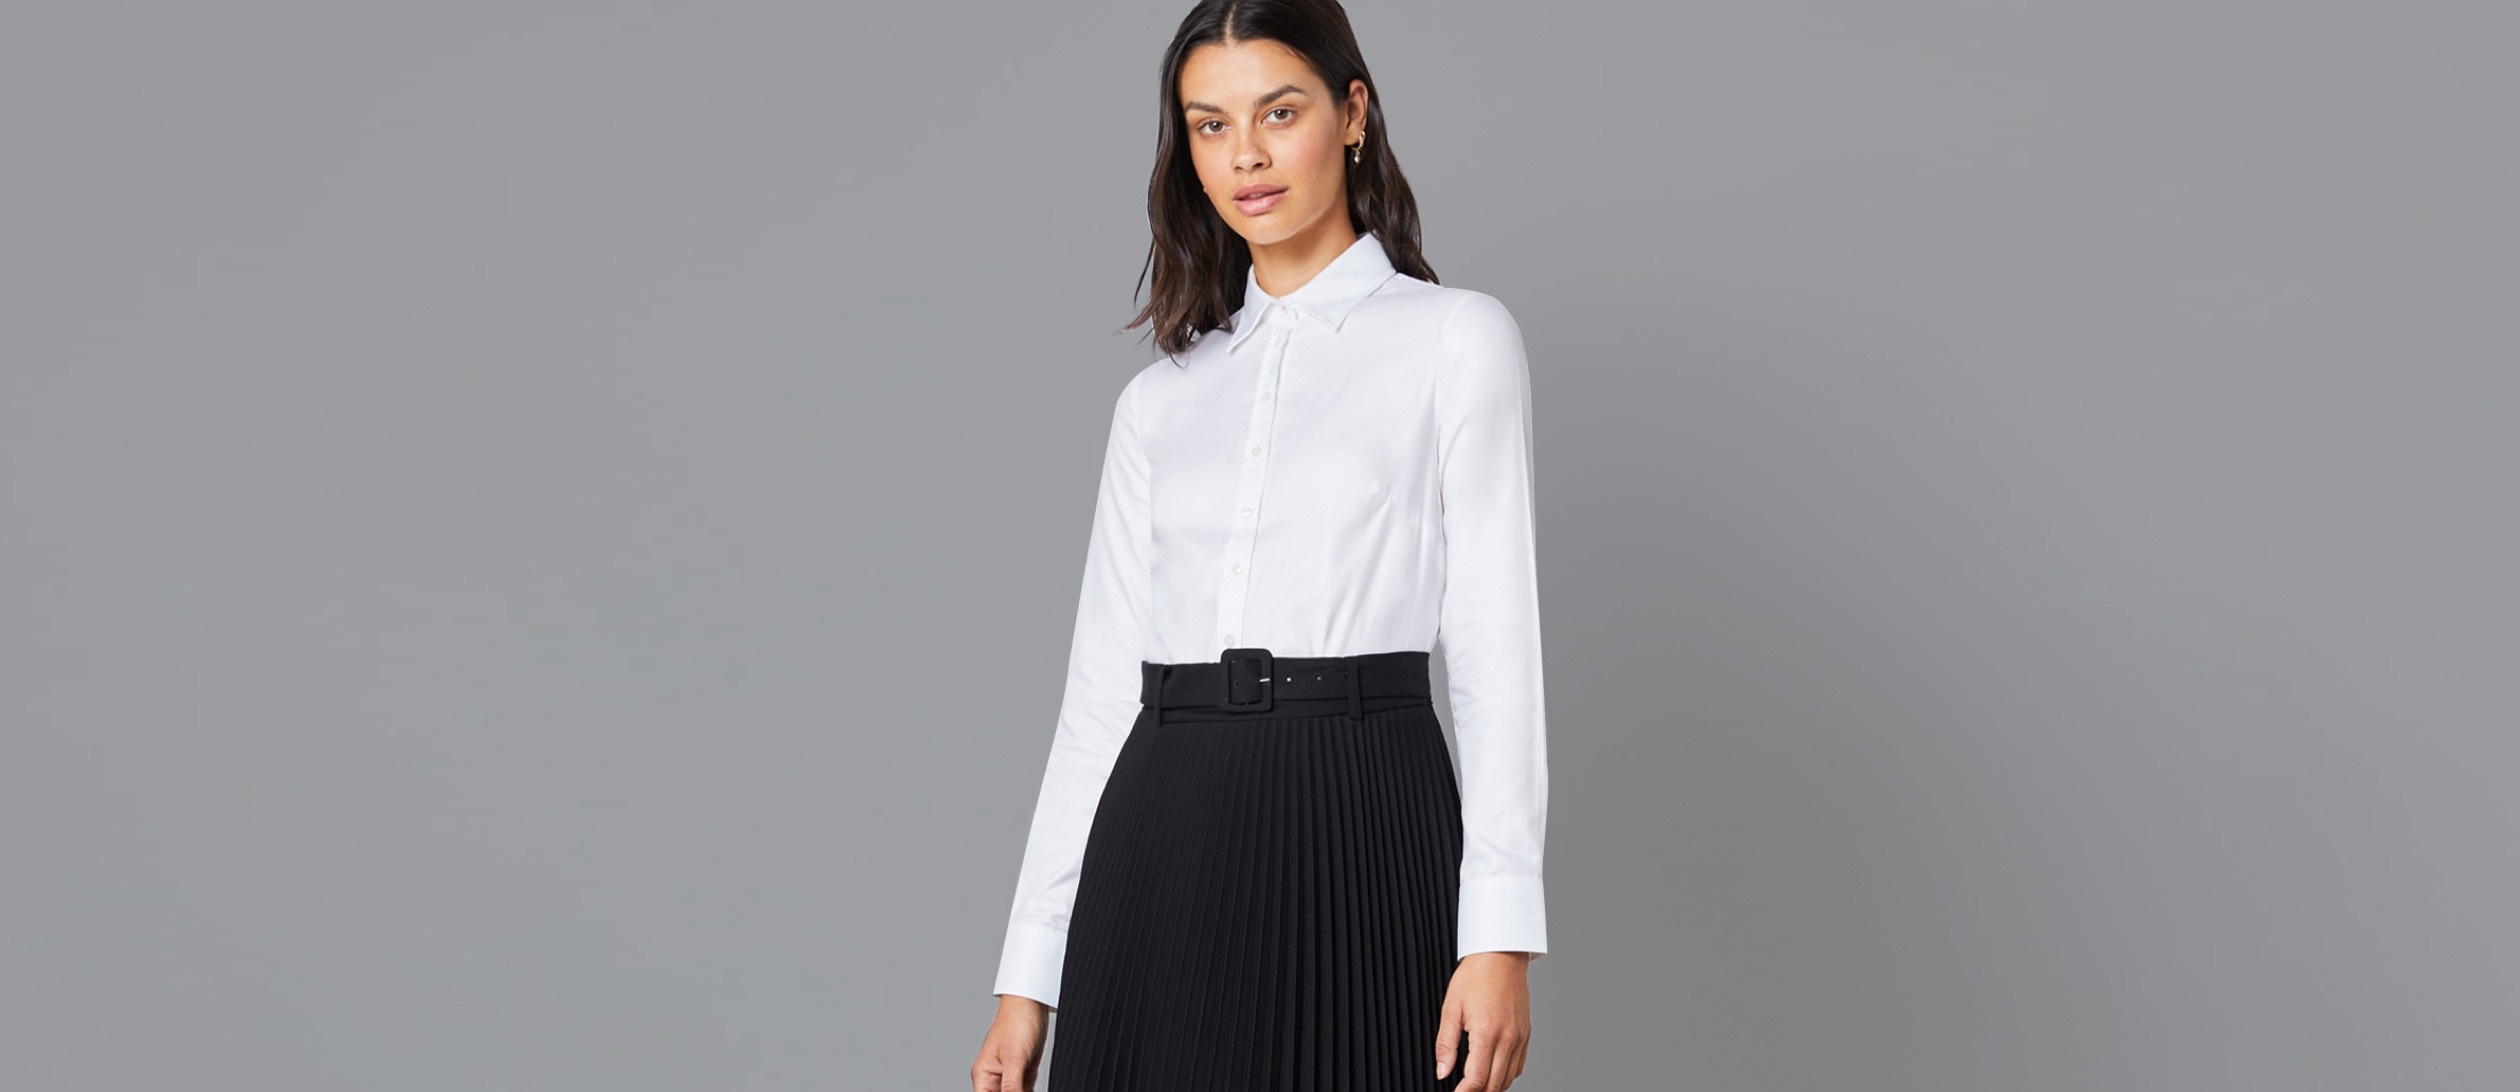 The Perfect White Shirt For Women | Hawes & Curtis